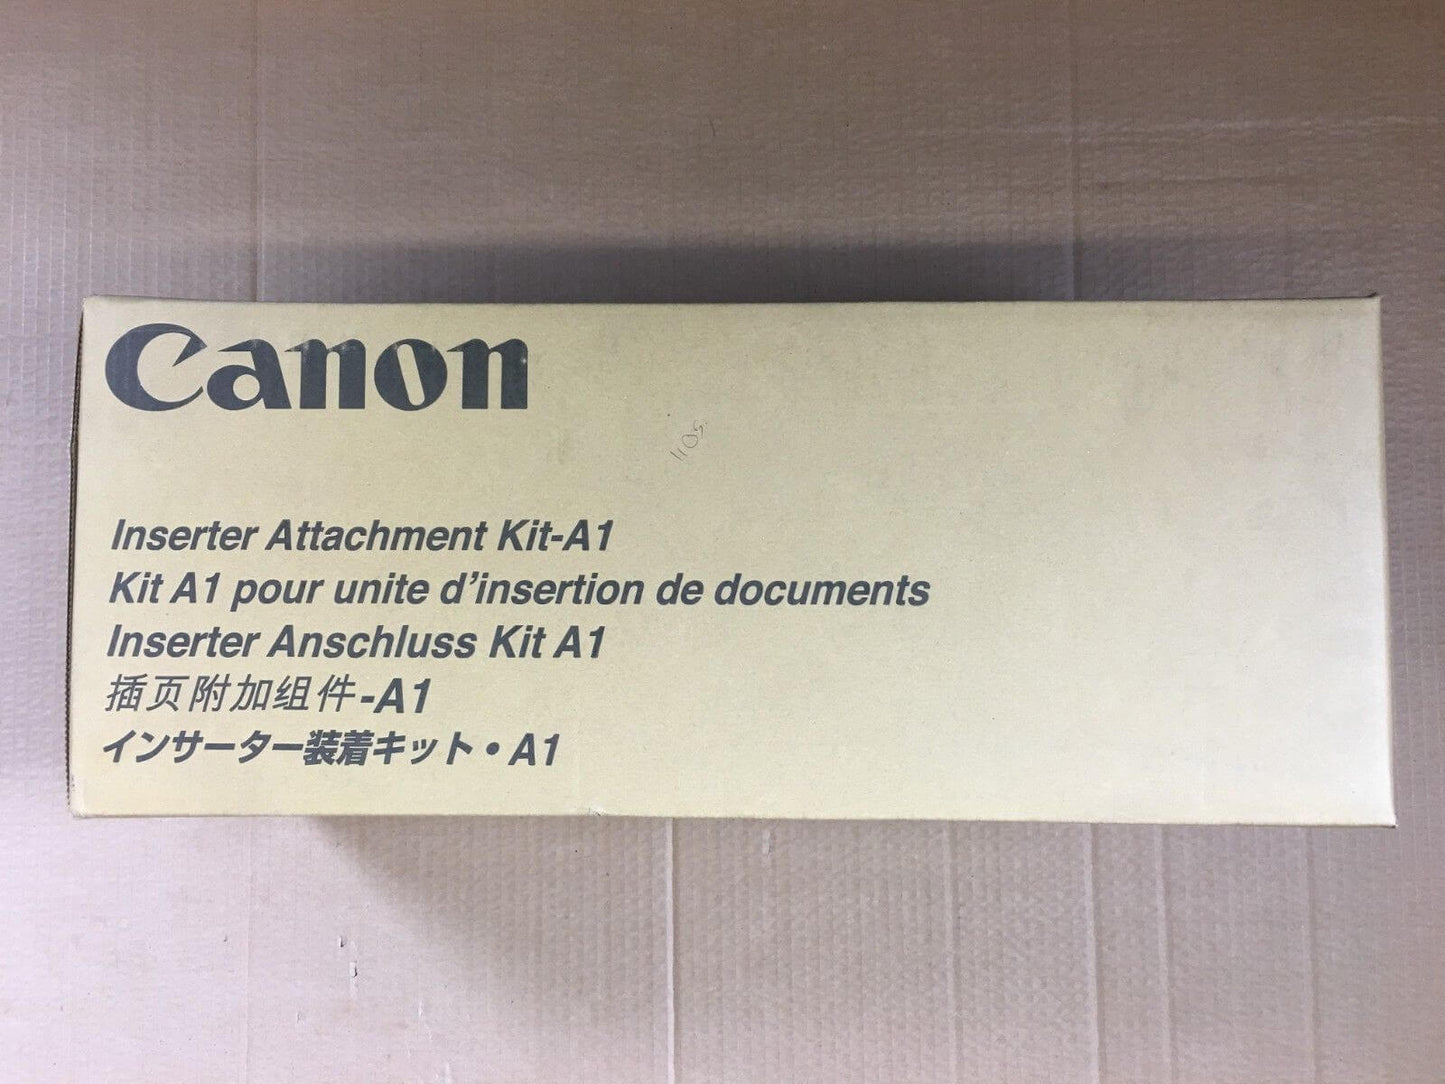 GENUINE CANON INSERTER ATTACHMENT KIT-A1 1508B001[AA] FedEx 2Day Air!! - copier-clearance-center